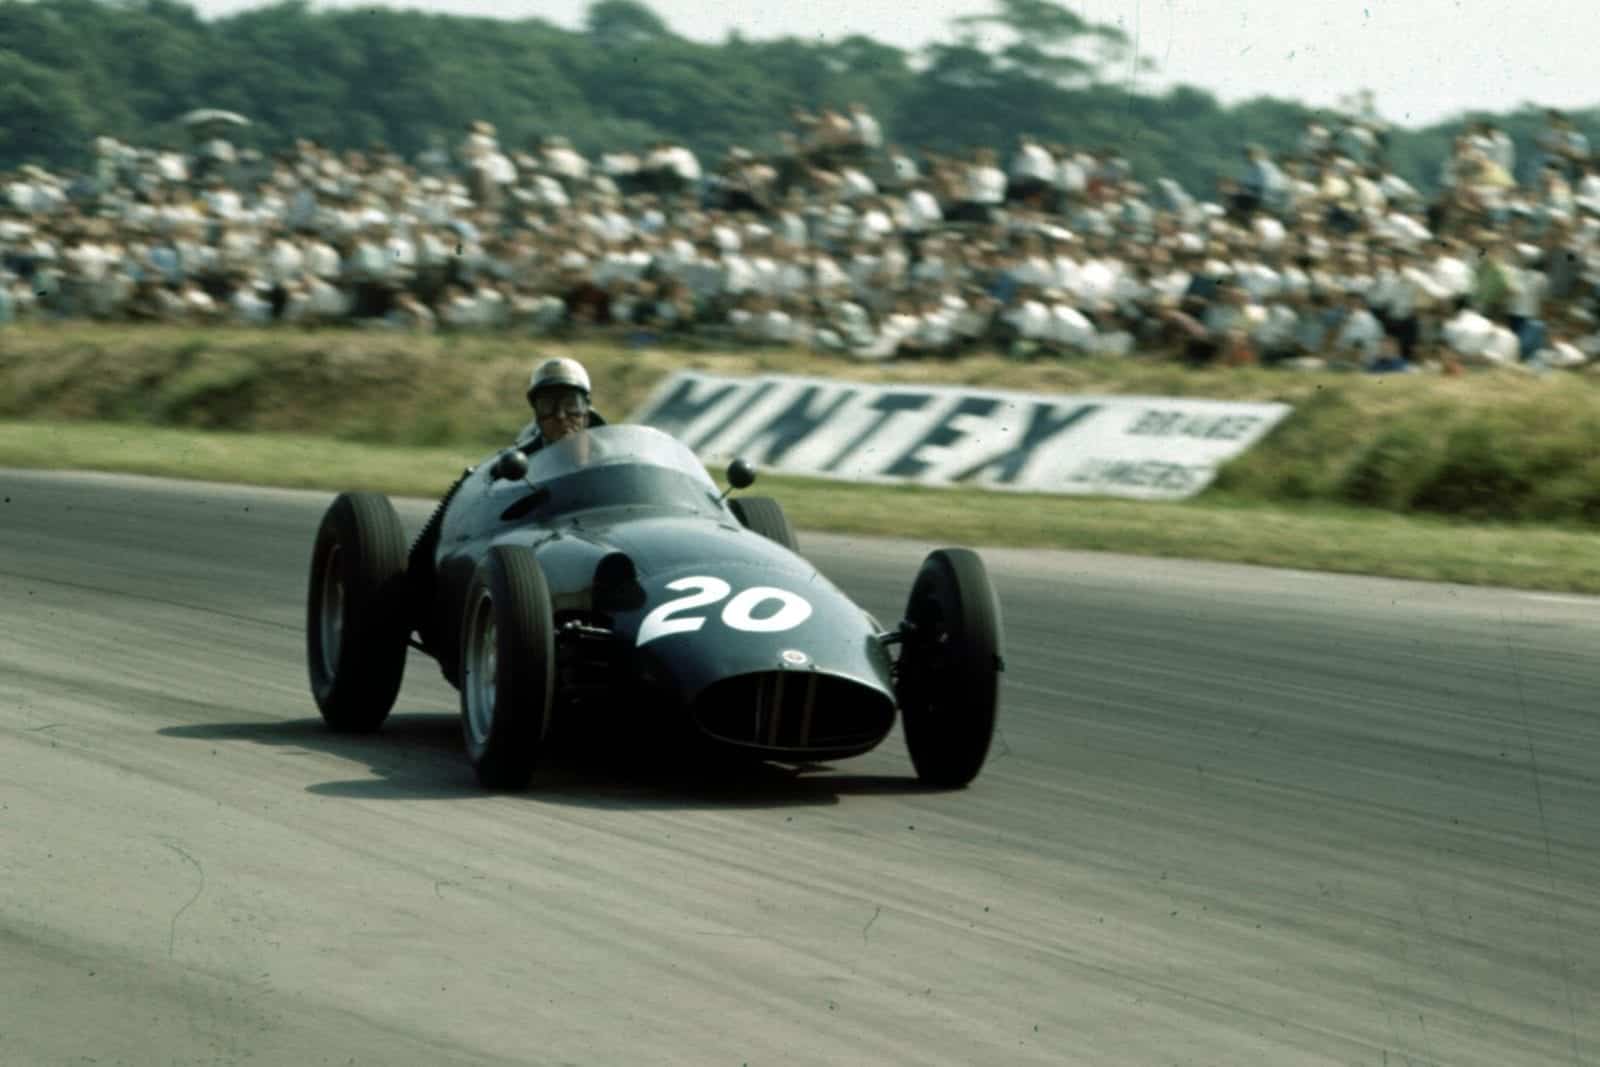 Harry Schell in his BRM P25.